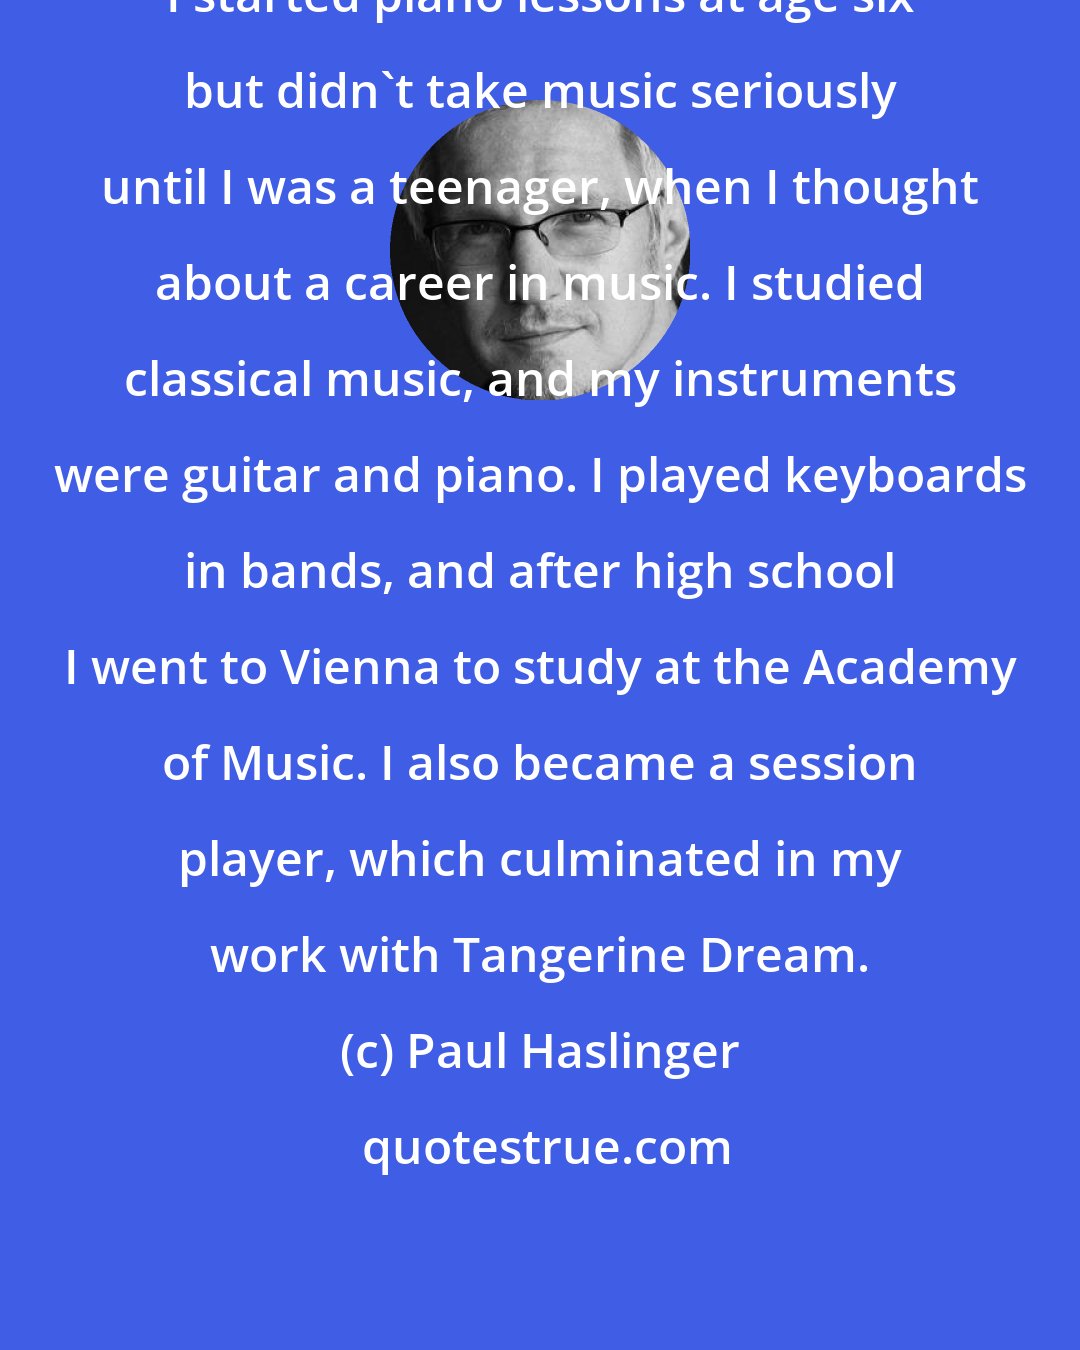 Paul Haslinger: I started piano lessons at age six but didn't take music seriously until I was a teenager, when I thought about a career in music. I studied classical music, and my instruments were guitar and piano. I played keyboards in bands, and after high school I went to Vienna to study at the Academy of Music. I also became a session player, which culminated in my work with Tangerine Dream.